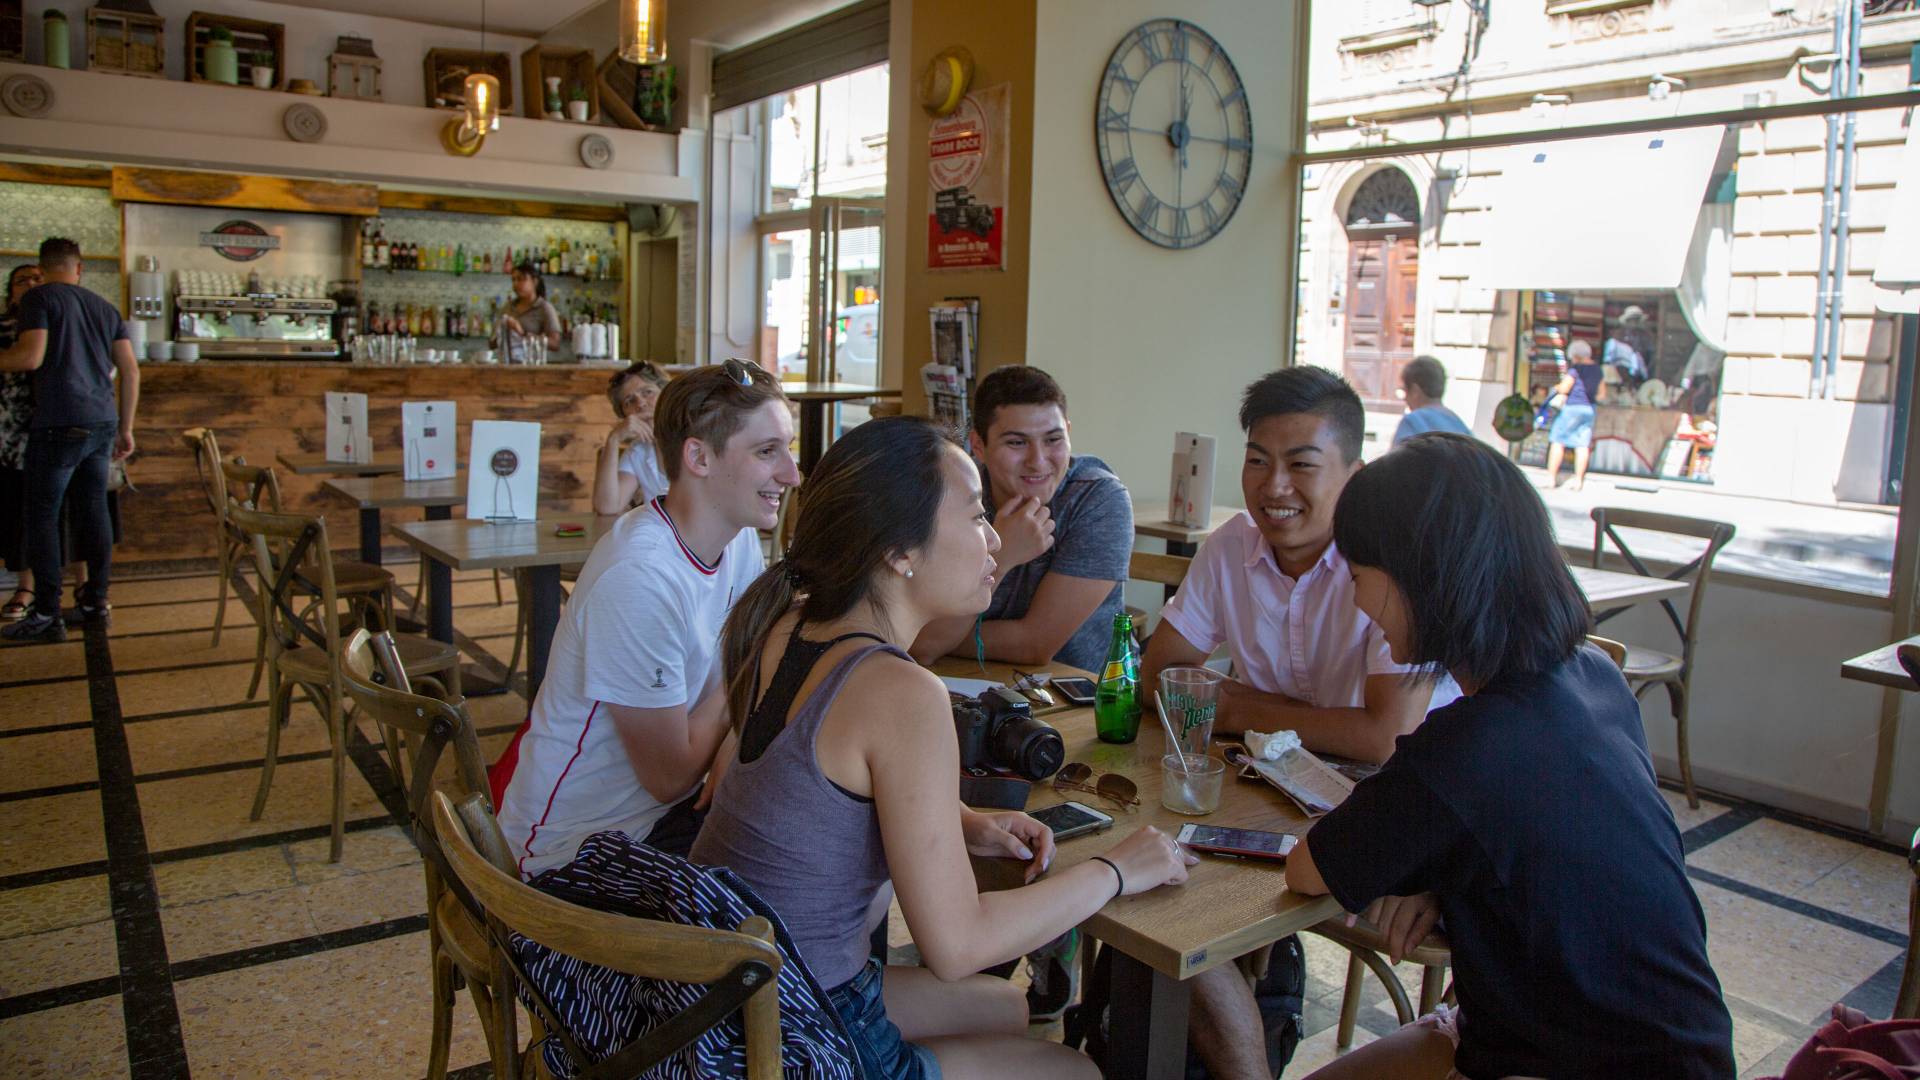 Students eating at a cafe in Arles, France